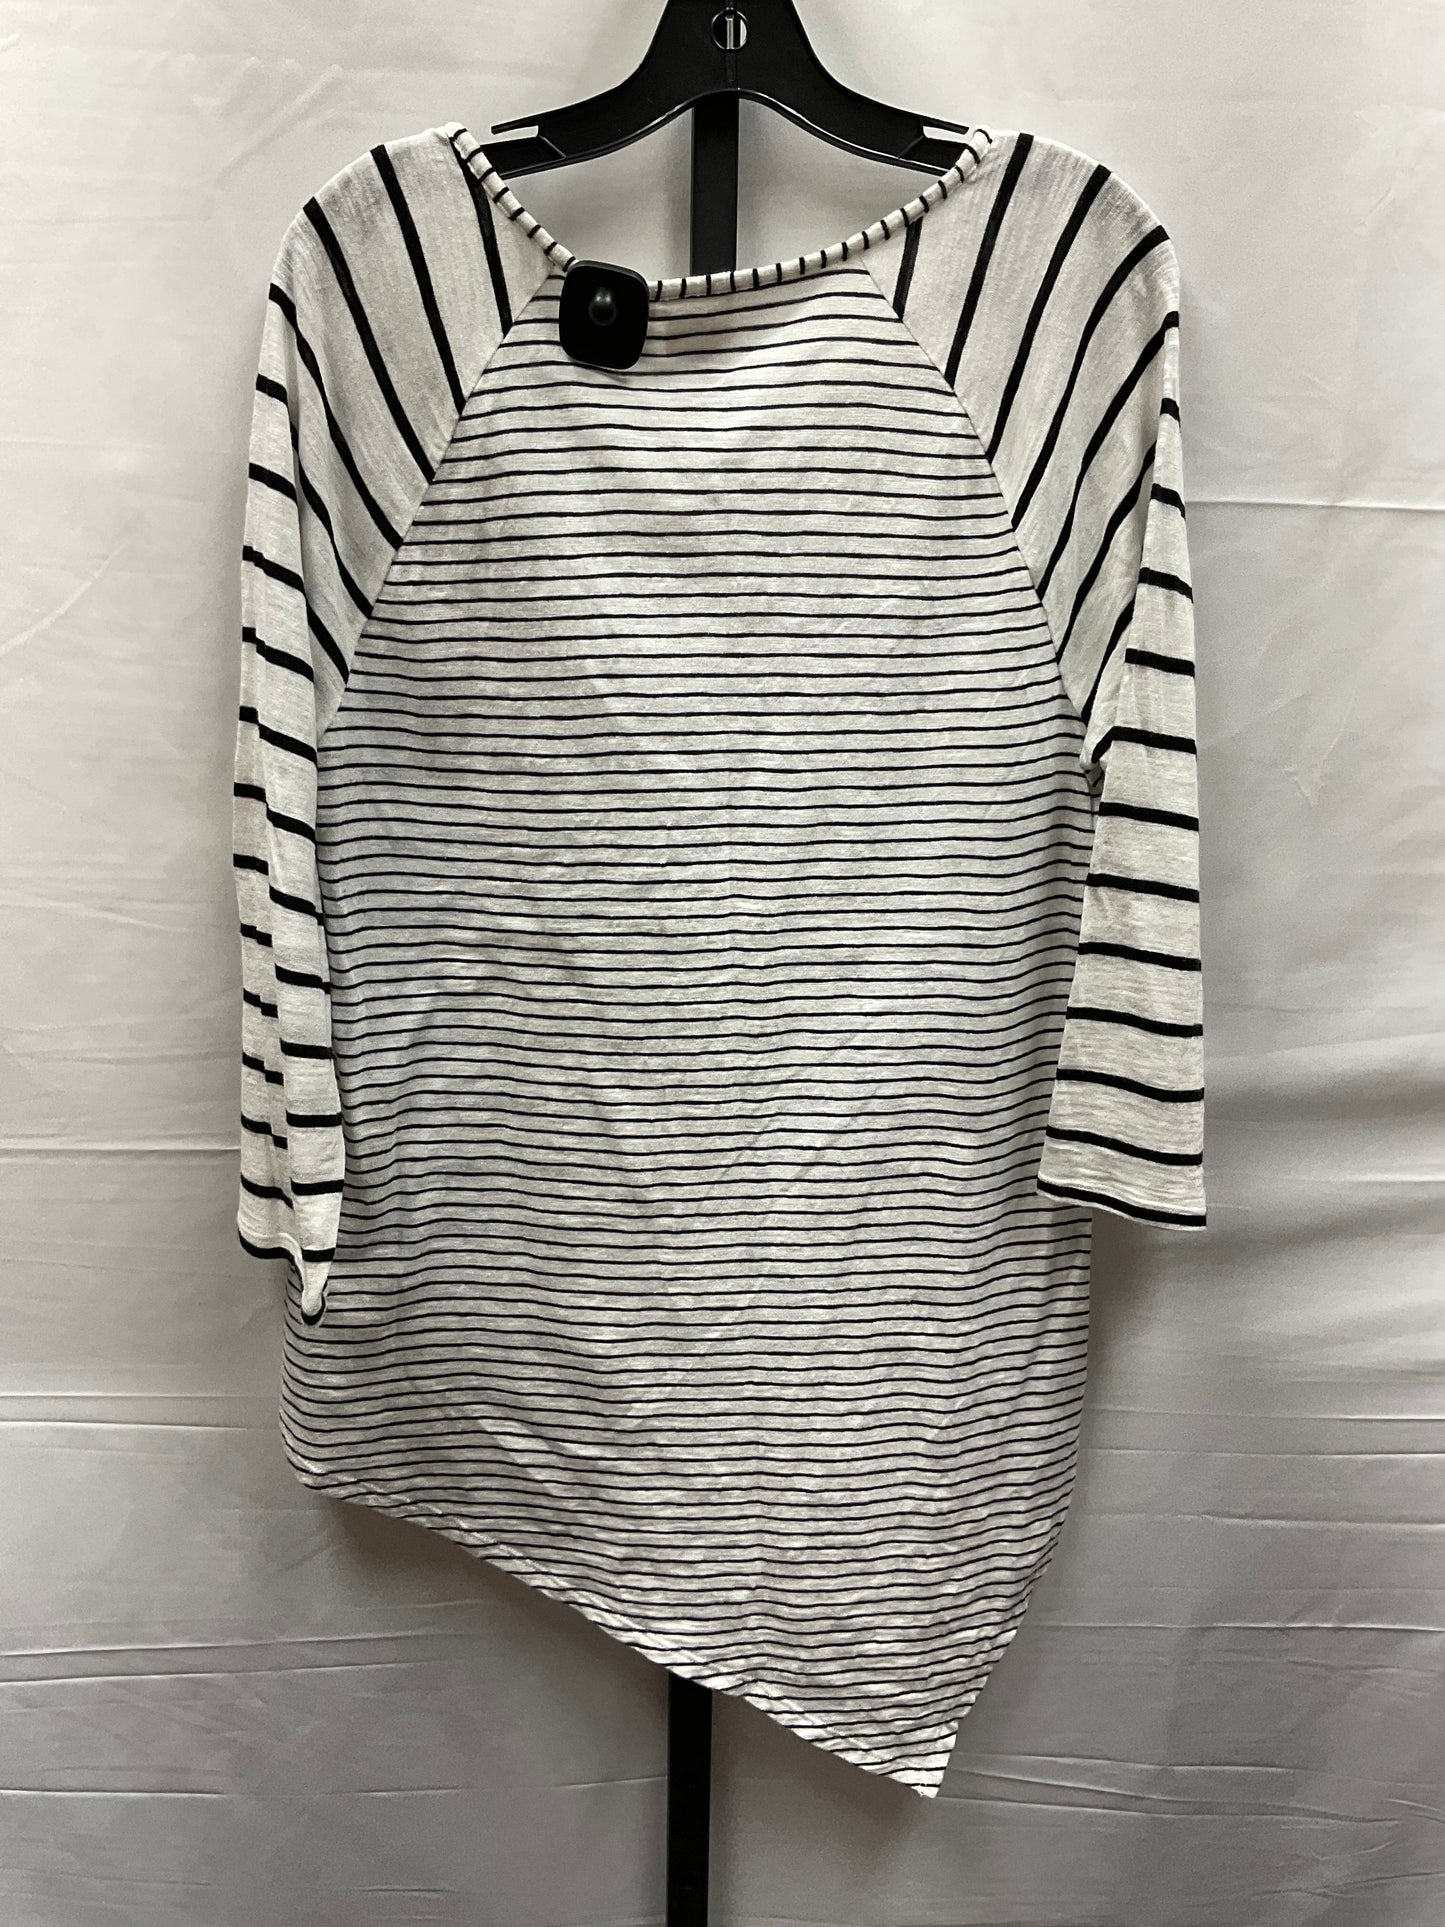 Black & White Top Long Sleeve Chicos, Size L